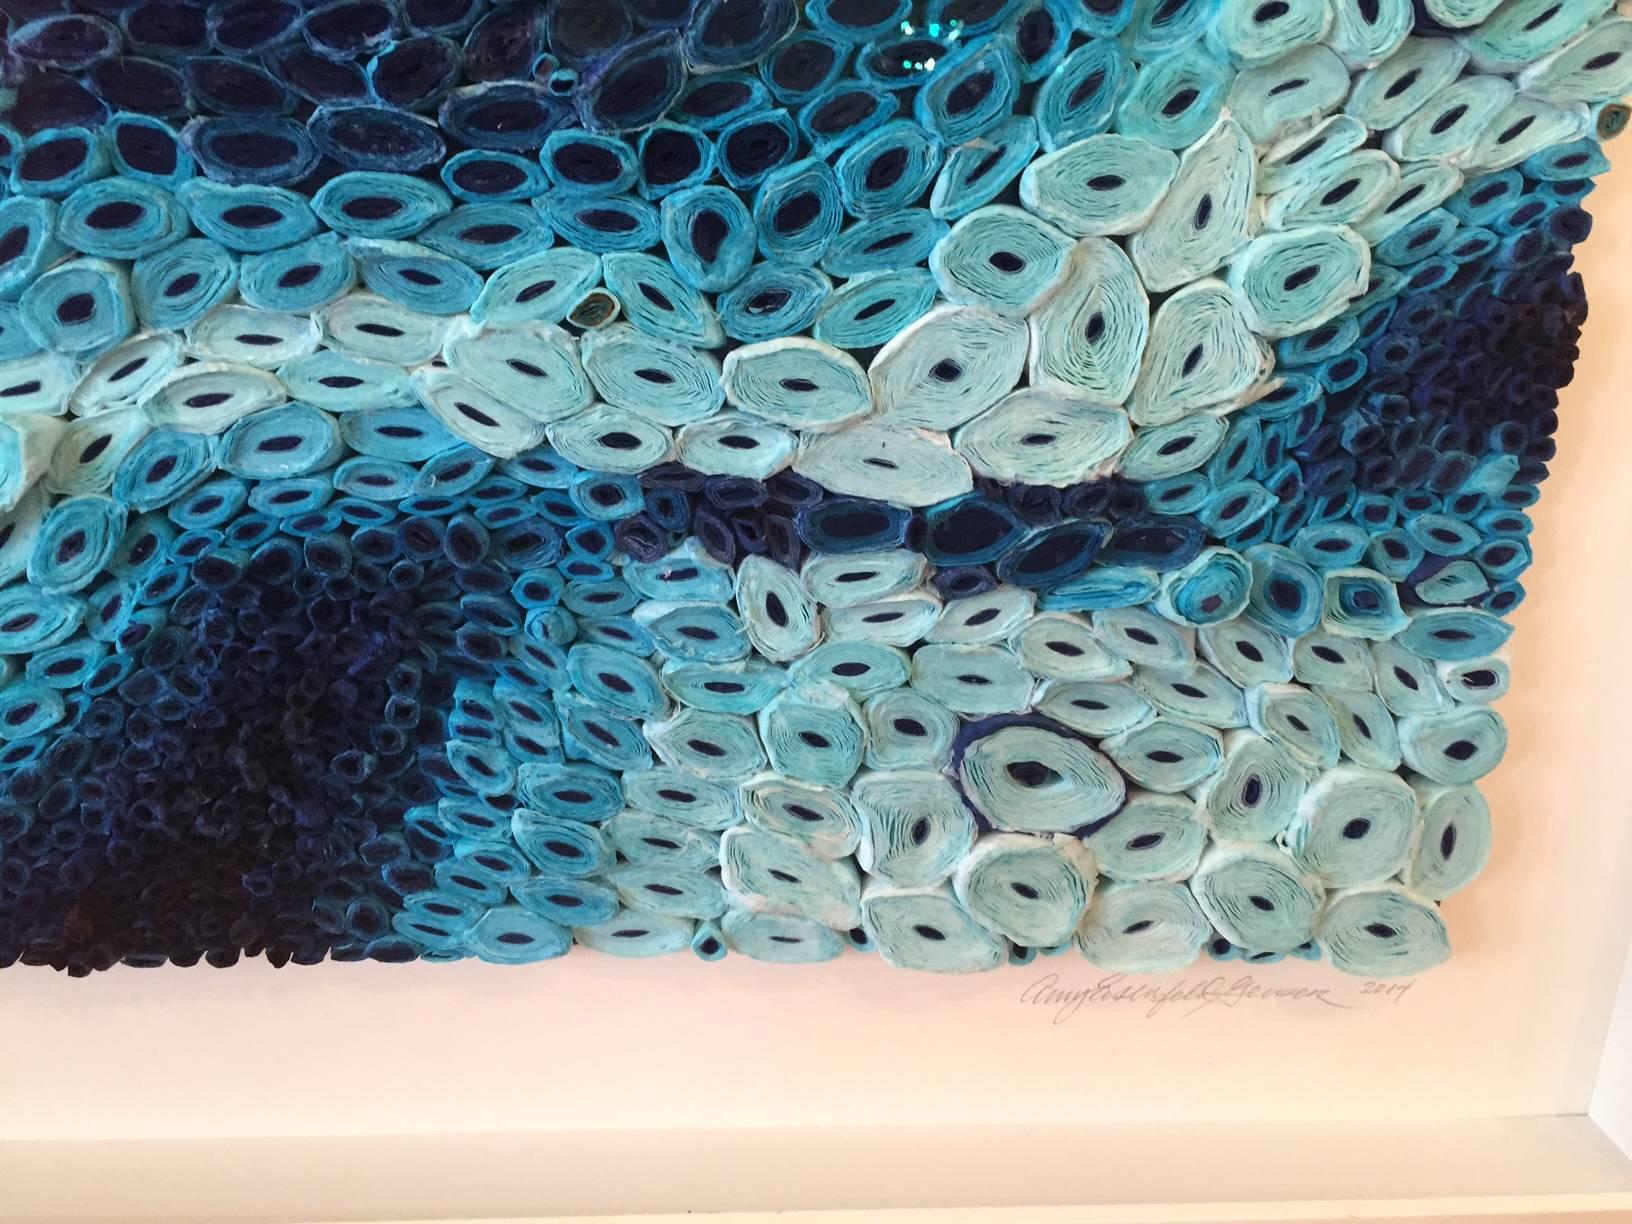 This blue mixed media piece is by Amy Genser who creates dimensional paper collages. These colorful, textural, one-of-a-kind wall pieces embody movement and processes. She masterfully manipulates paper -- each piece being cut, rolled and stacked --